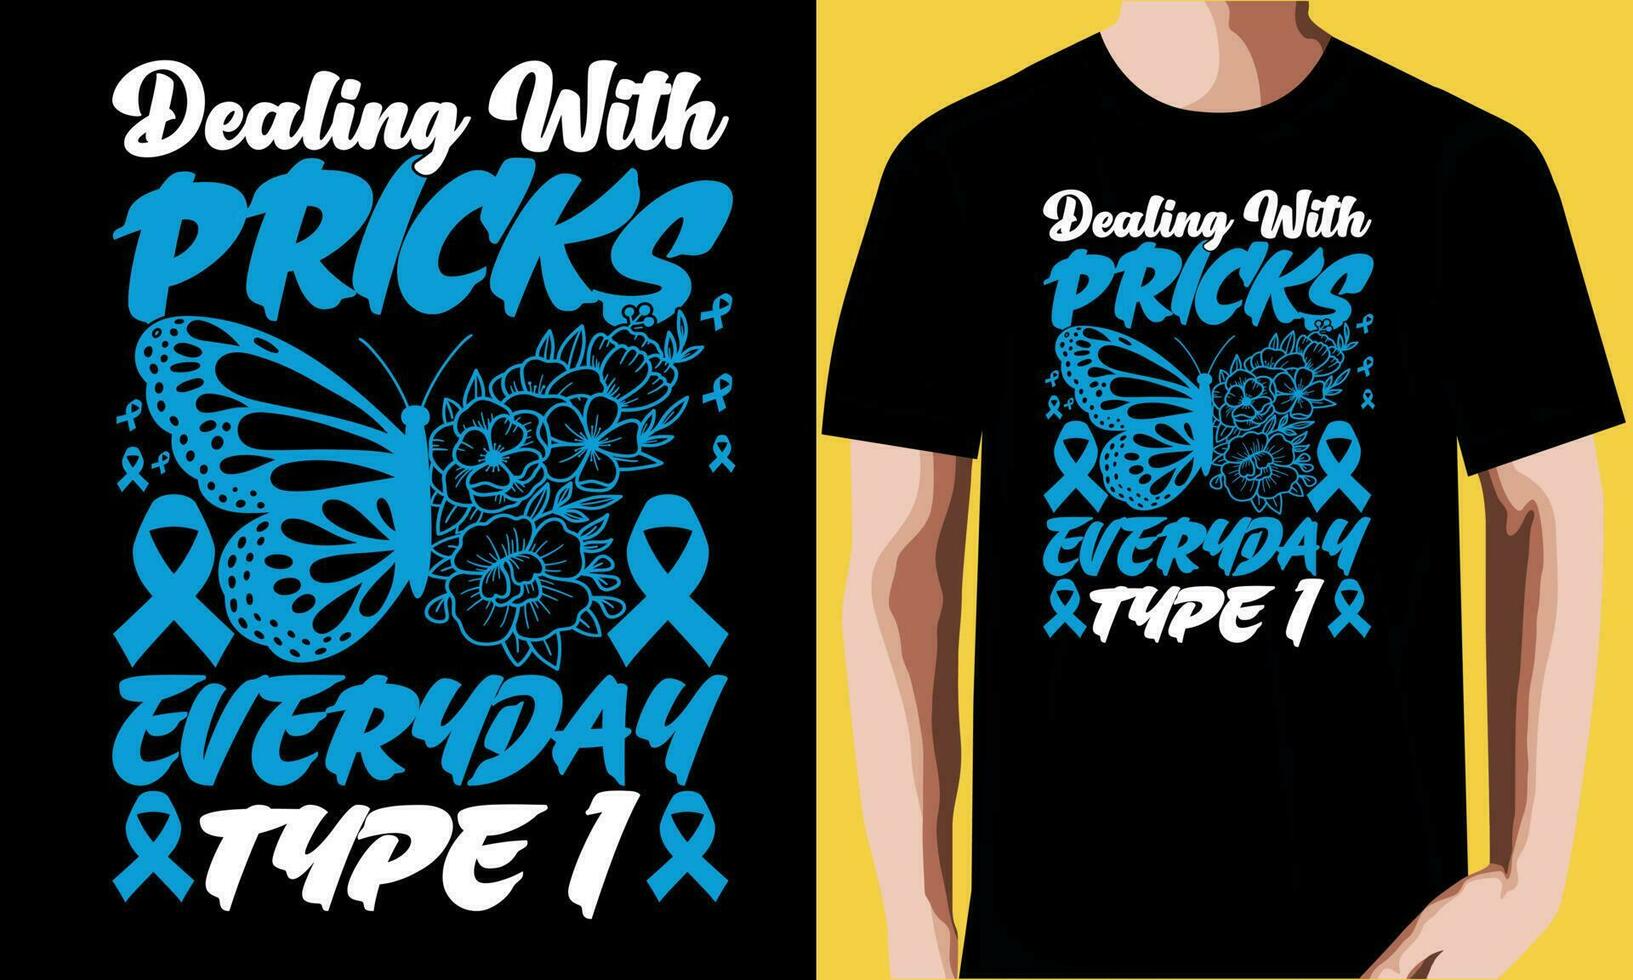 Dealing with pricks everyday type 1 T-shirt Design vector